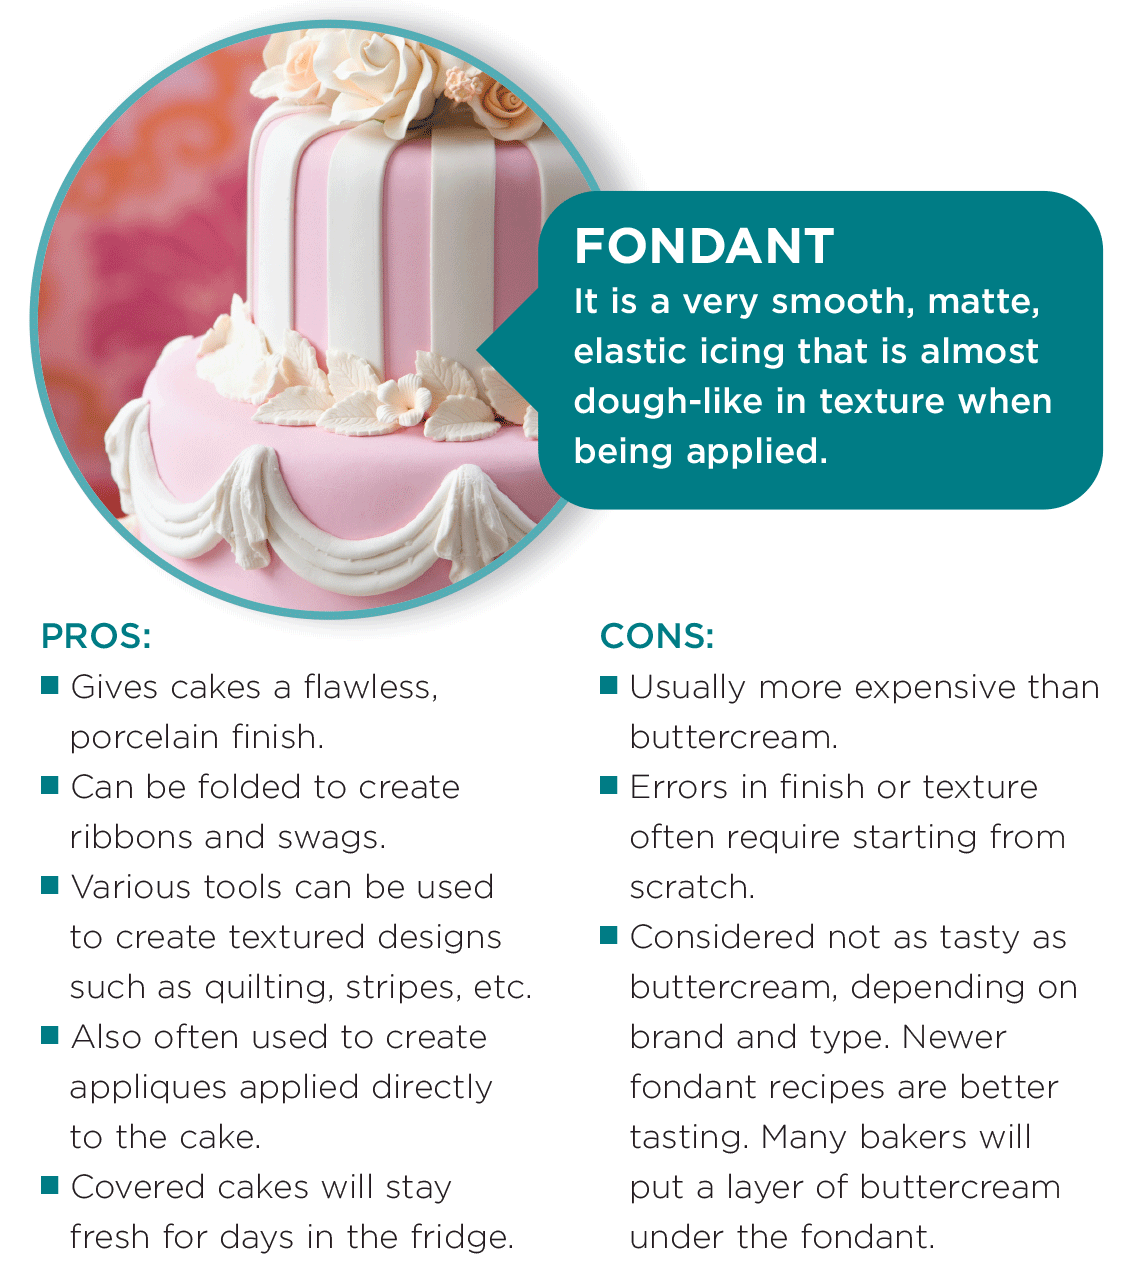 FONDANT It is a very smooth, matte, elastic icing that is almost dough-like in texture when being applied